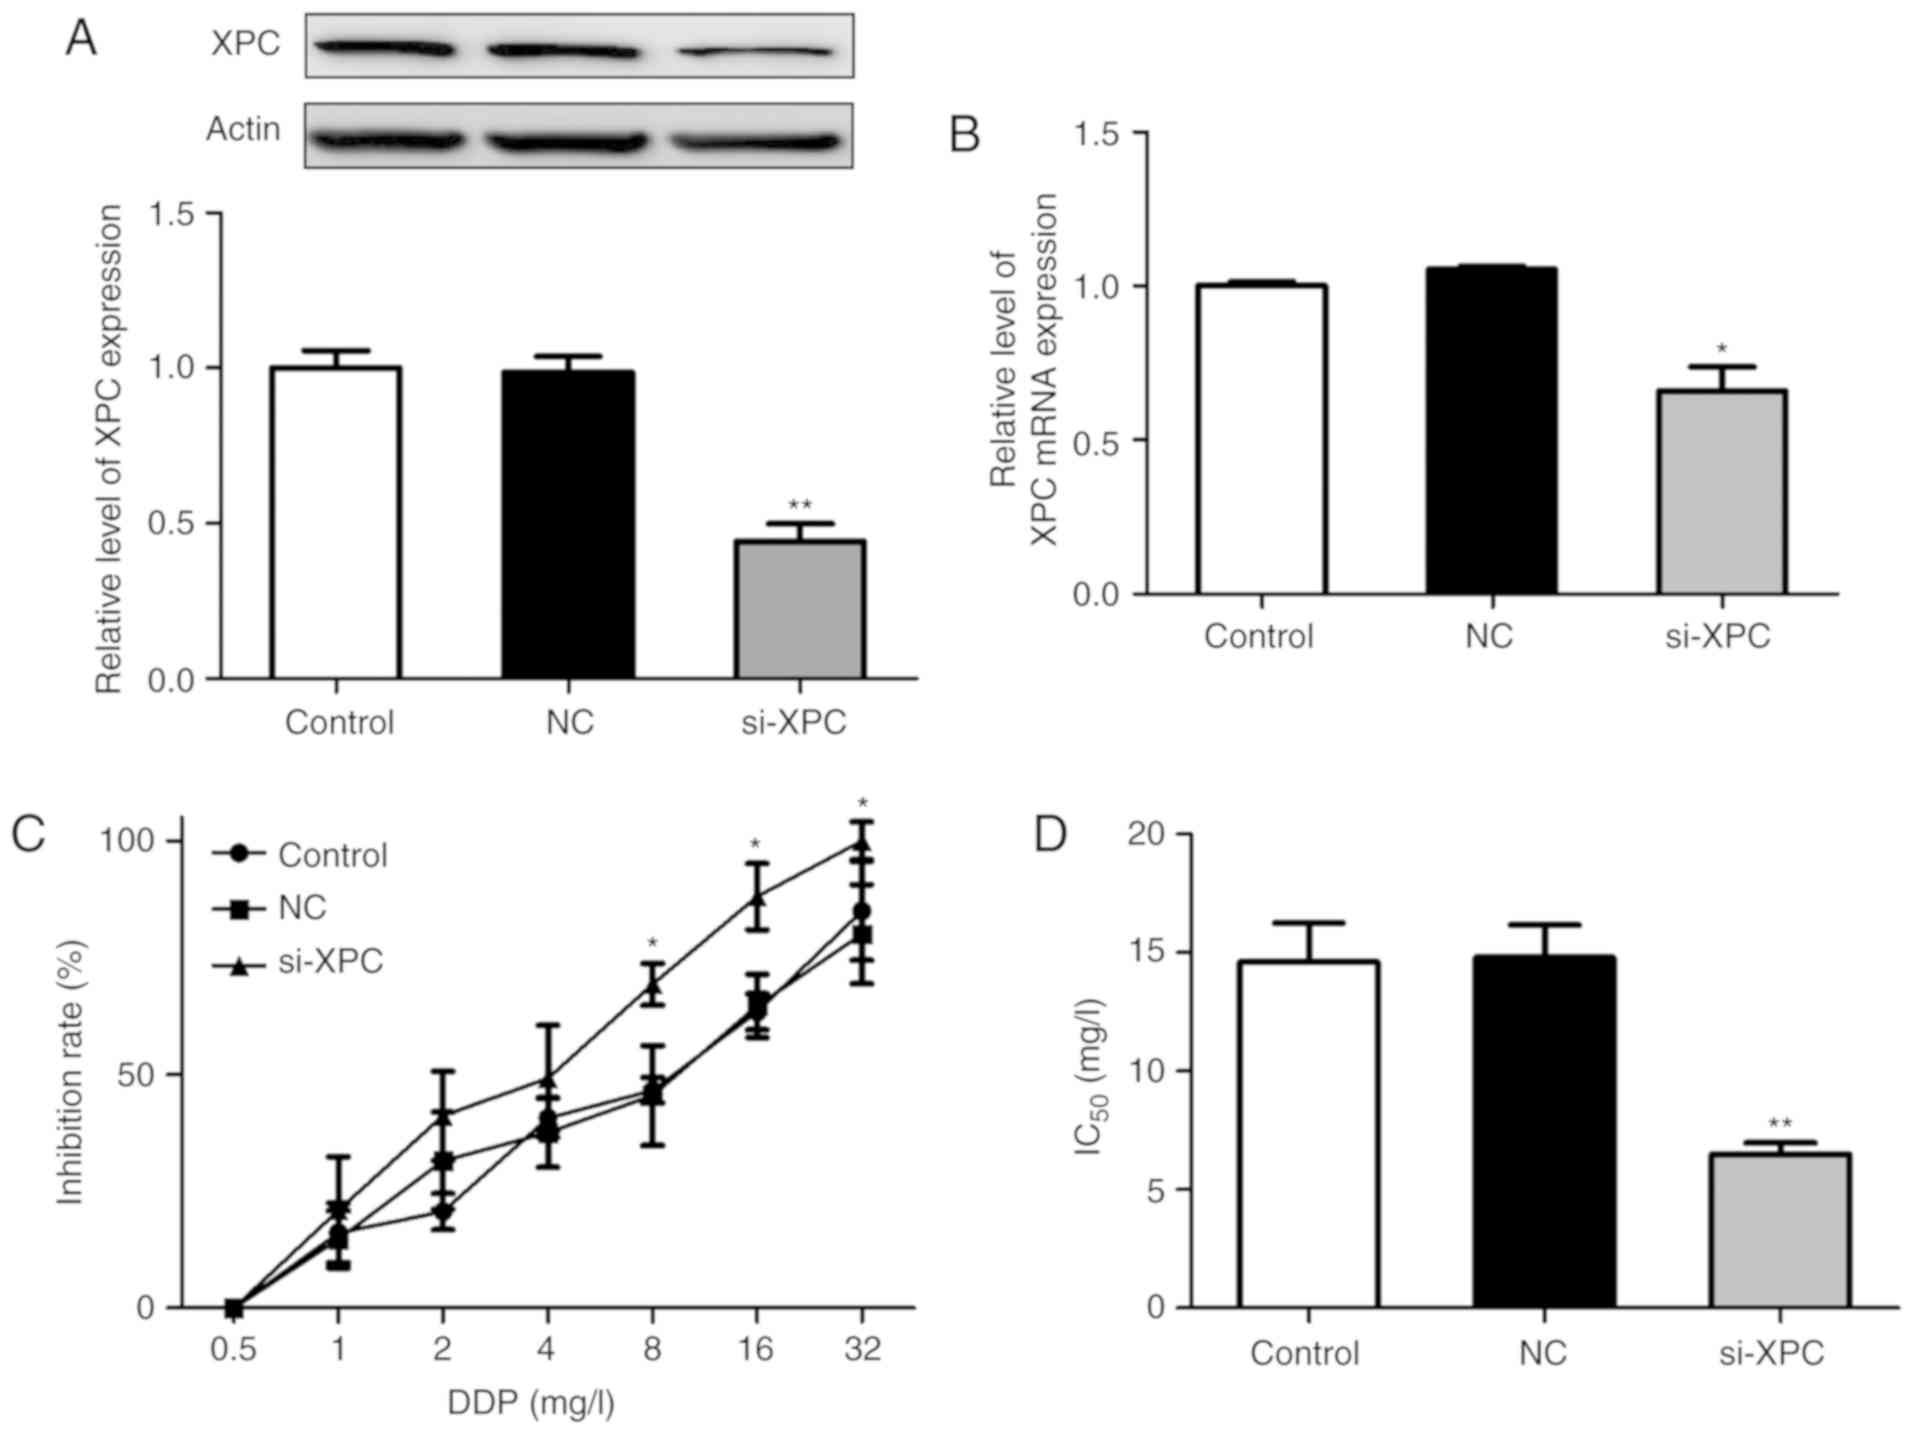 Xpc Inhibition Rescues Cisplatin Resistance Via The Akt Mtor Signaling Pathway In A549 Ddp Lung Adenocarcinoma Cells